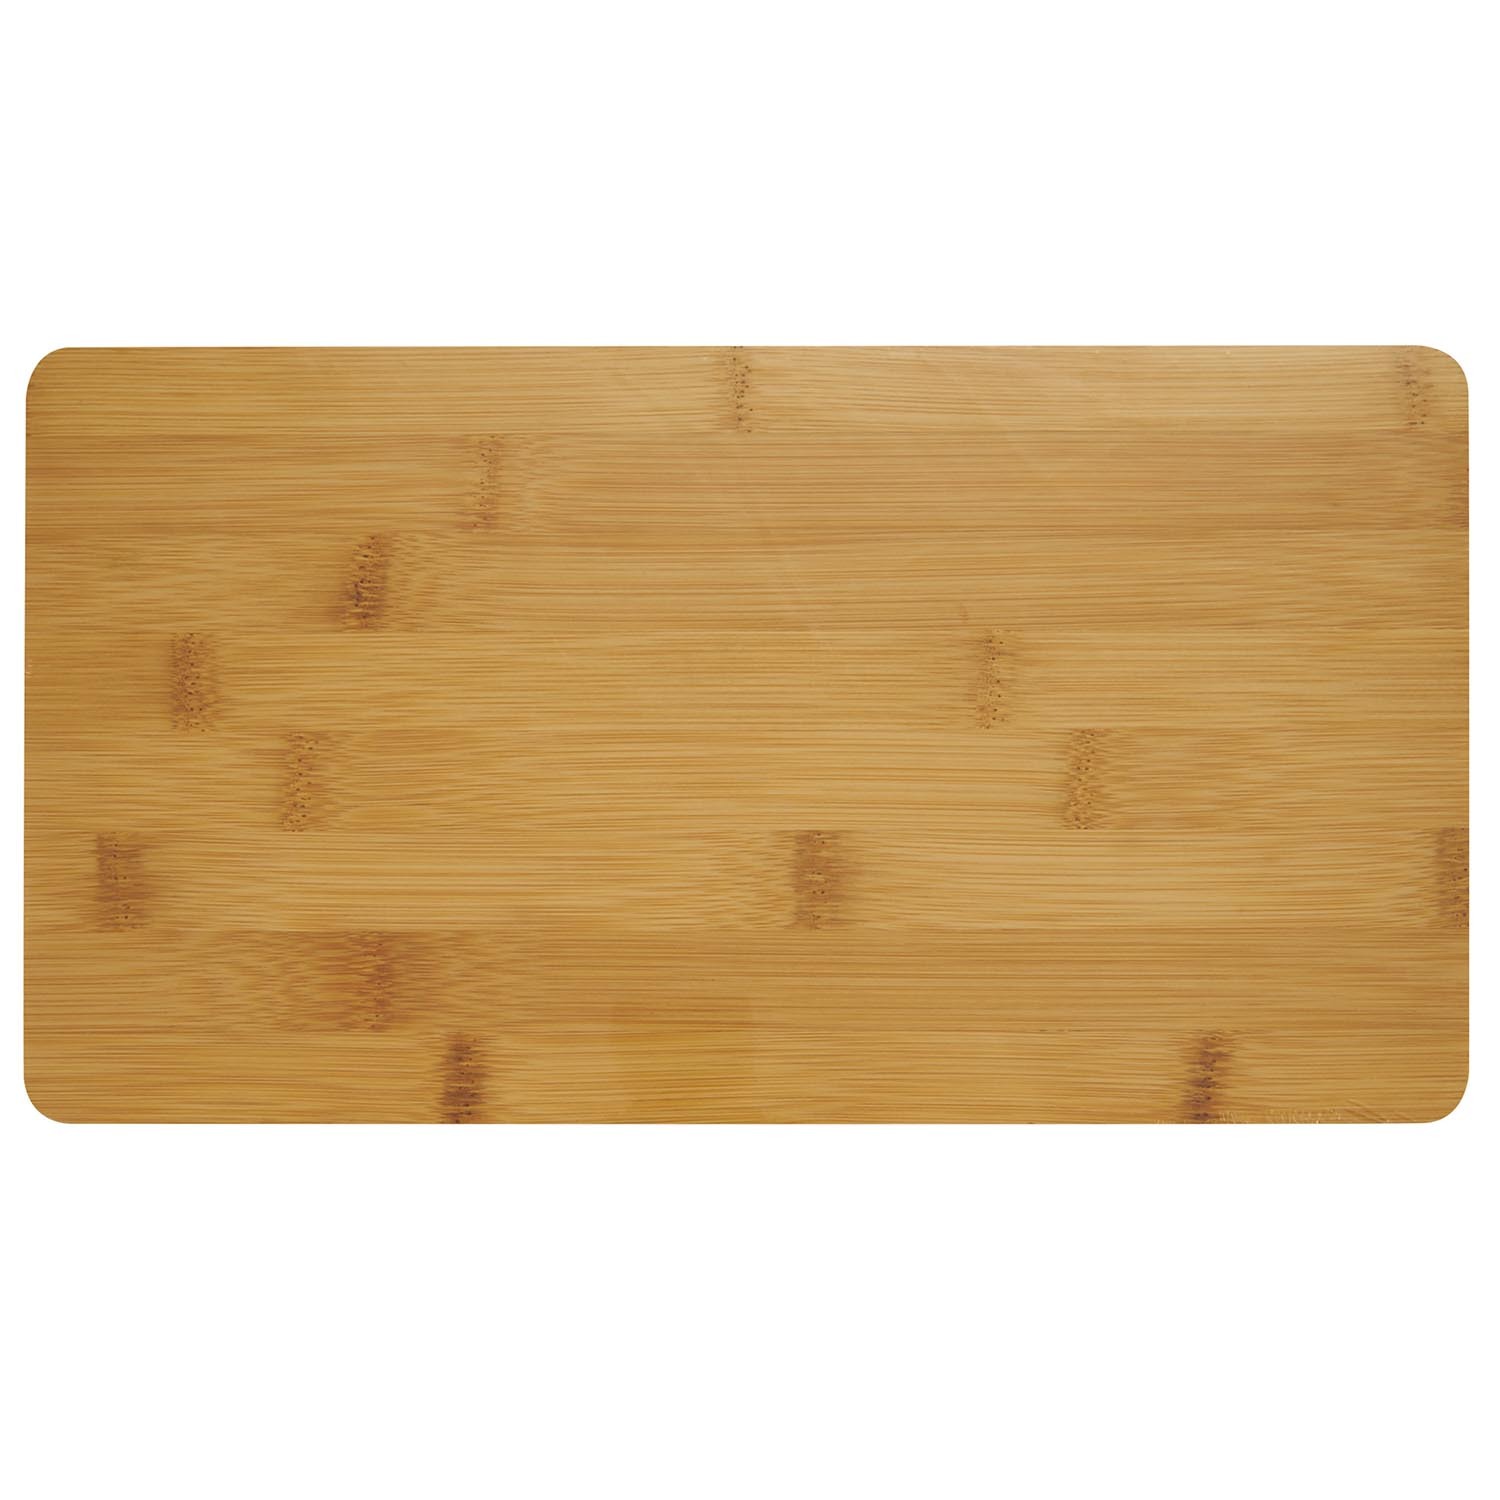 Bamboo Cheese Board with 3 Cheese Knives - Brown Image 4